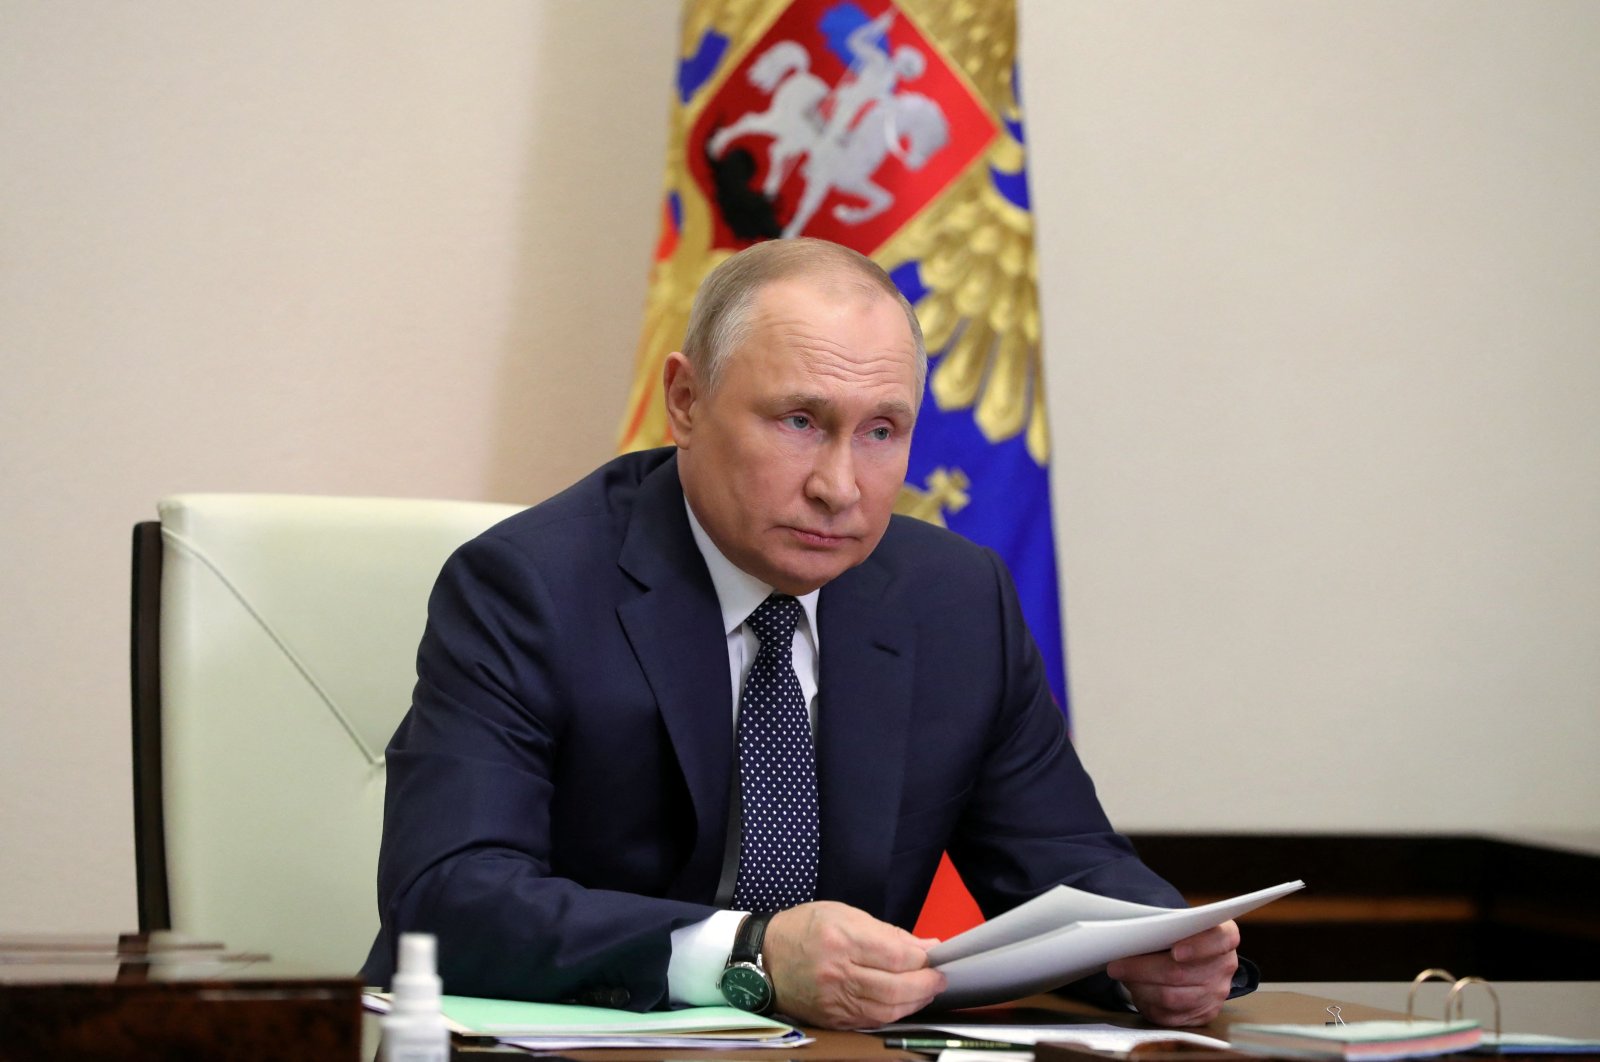 Russian President Vladimir Putin chairs a meeting on the development of air transportation and aircraft manufacturing via a video link at the Novo-Ogaryovo state residence outside Moscow, Russia, March 31, 2022. (Kremlin via Reuters)